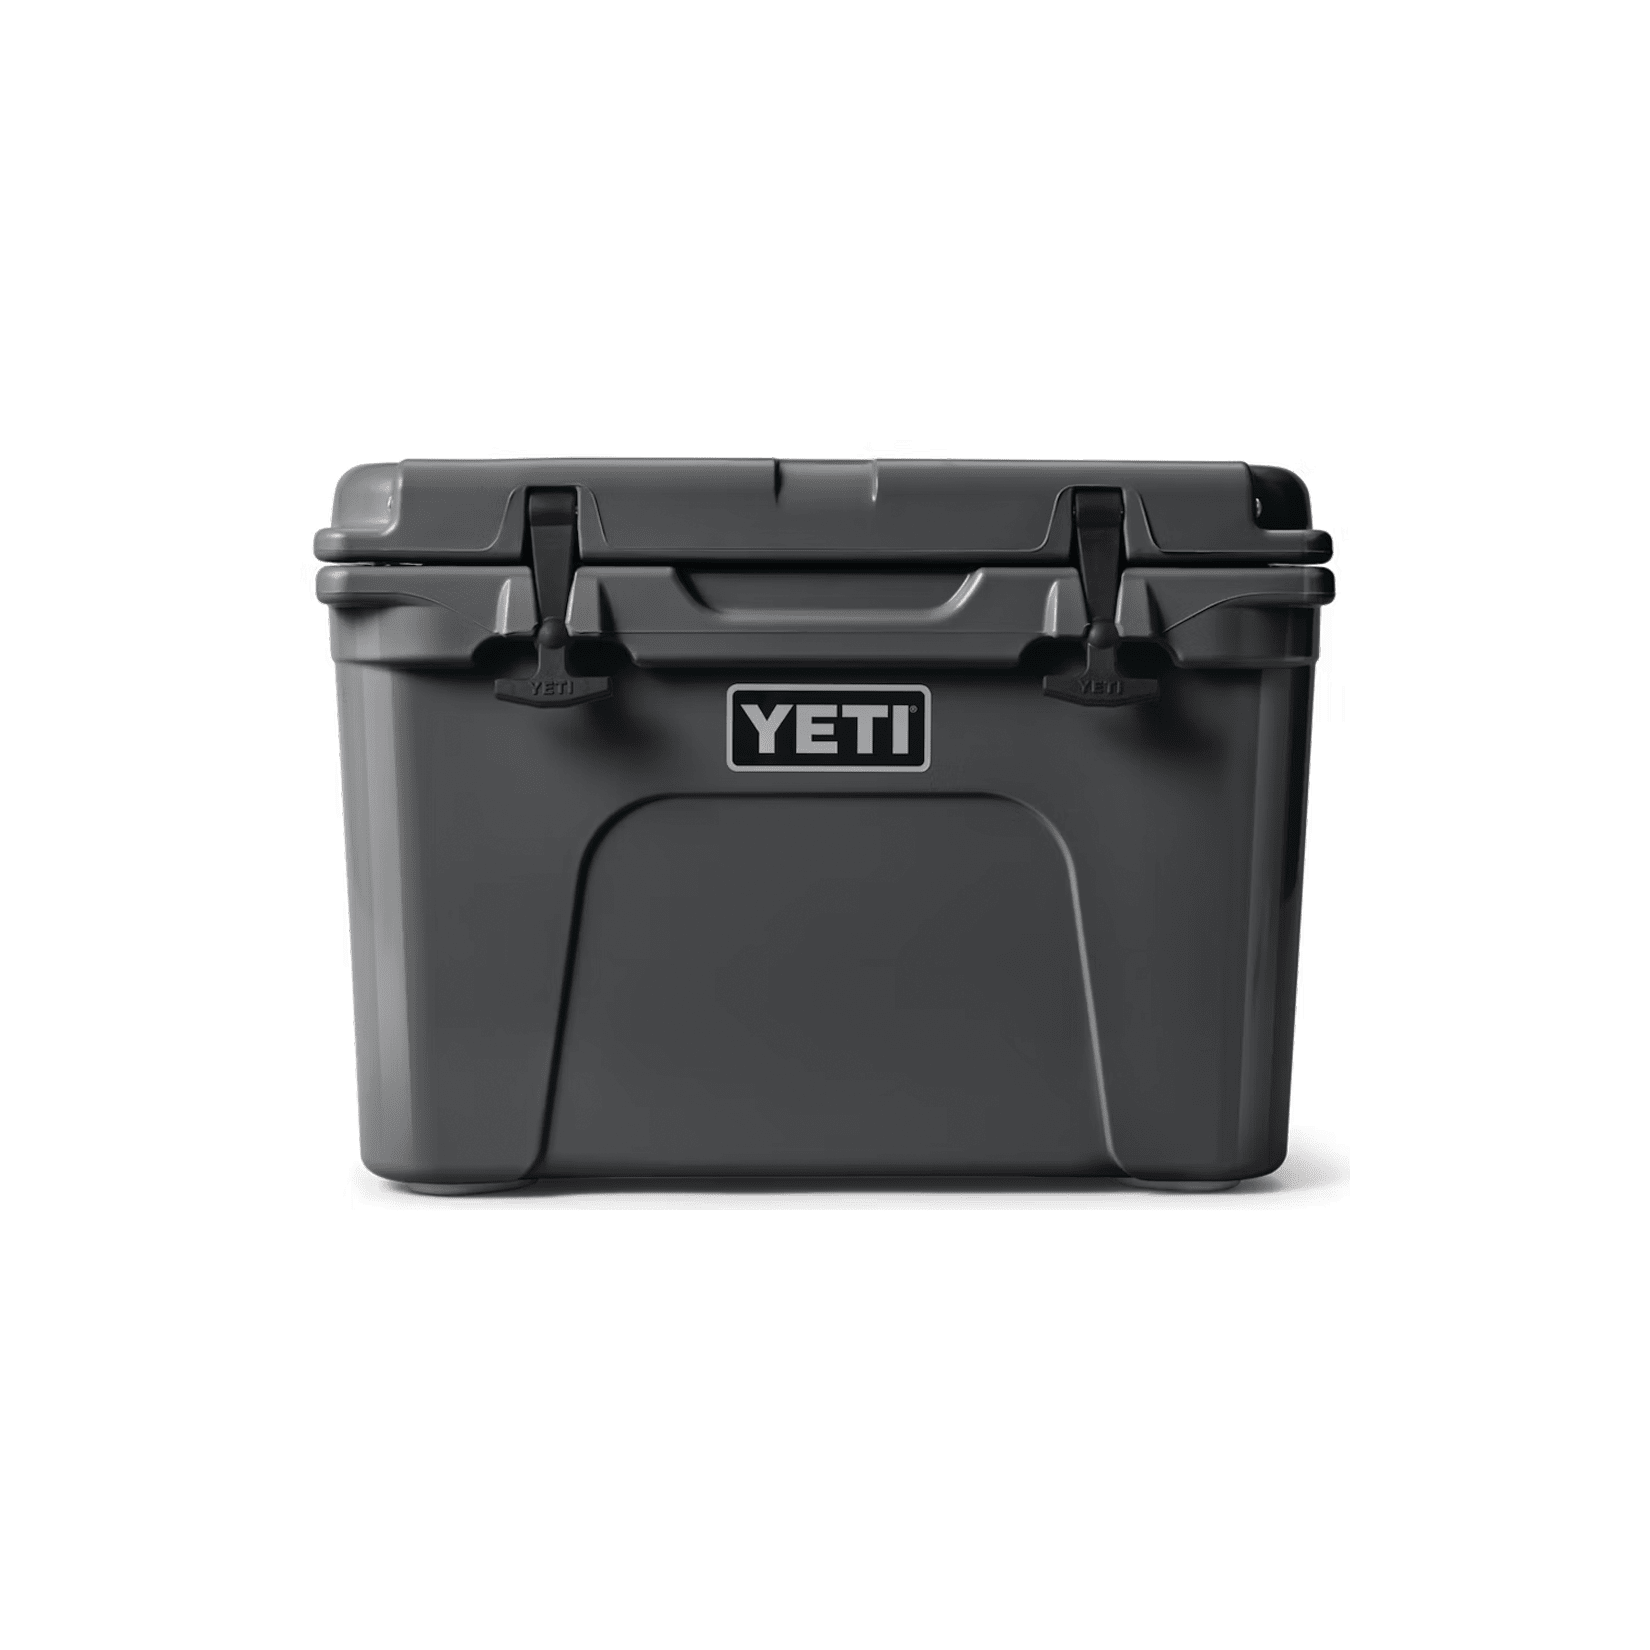 https://image.fisheriessupply.com/c_lpad,dpr_3.0,w_550,h_550,d_imageComingSoon-tiff/f_auto,q_auto/v1/static-images/yeti-tundra-coolers-white-charcoal-gray